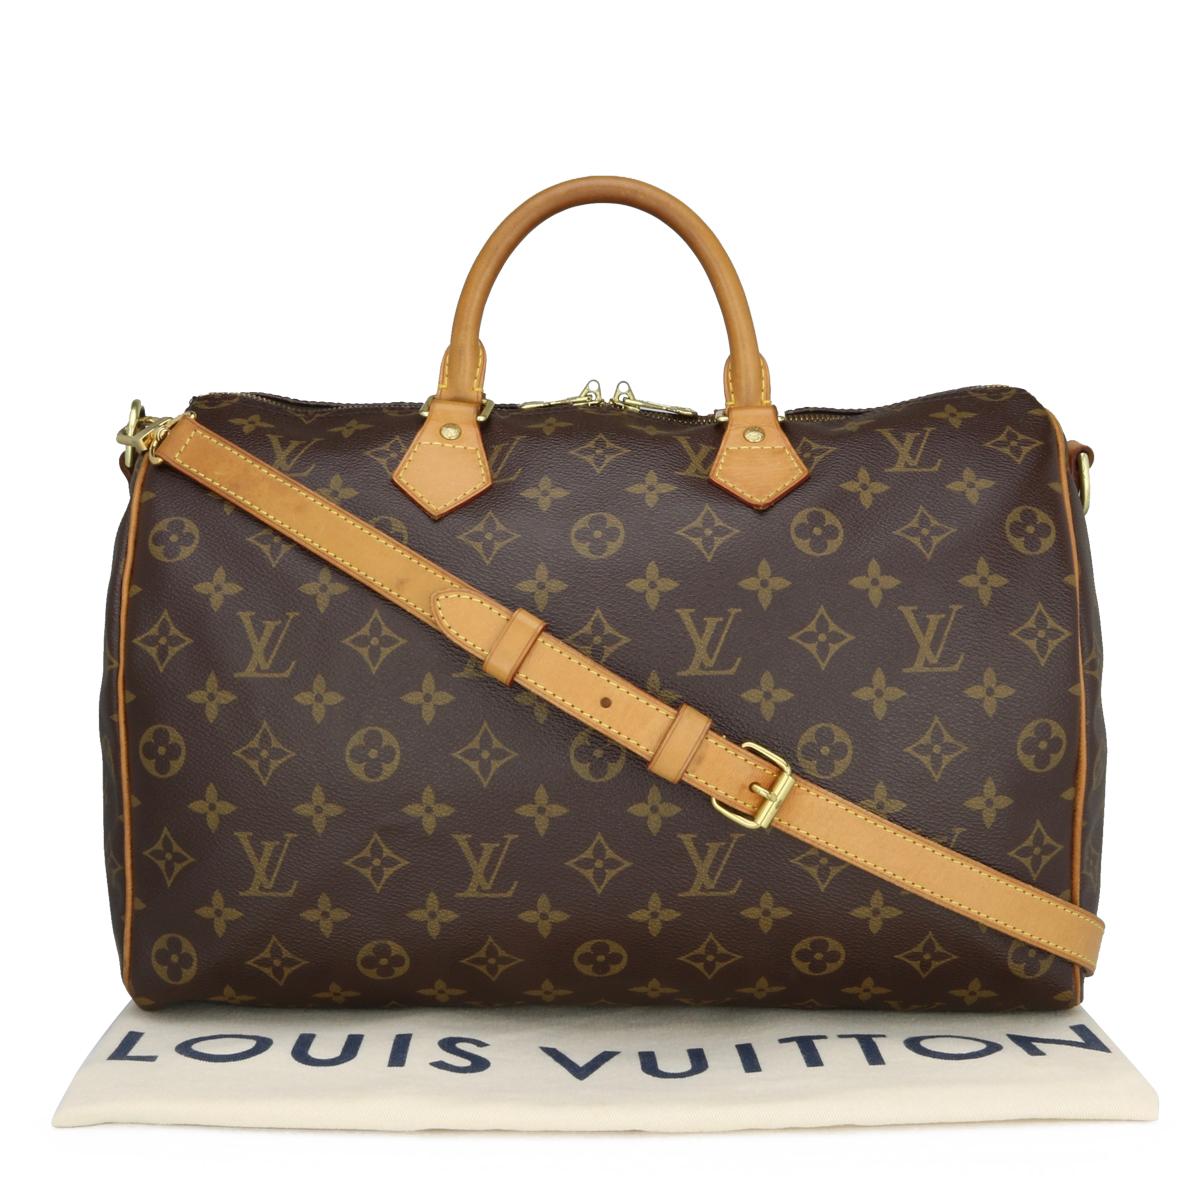 Louis Vuitton Speedy Bandoulière 35 Bag in Monogram 2011.

This bag is in good condition. 

- Exterior Condition: Good condition. Light storage creasing to the canvas. The outside of the bag shows signs of wear – leather/print surface rubbing to